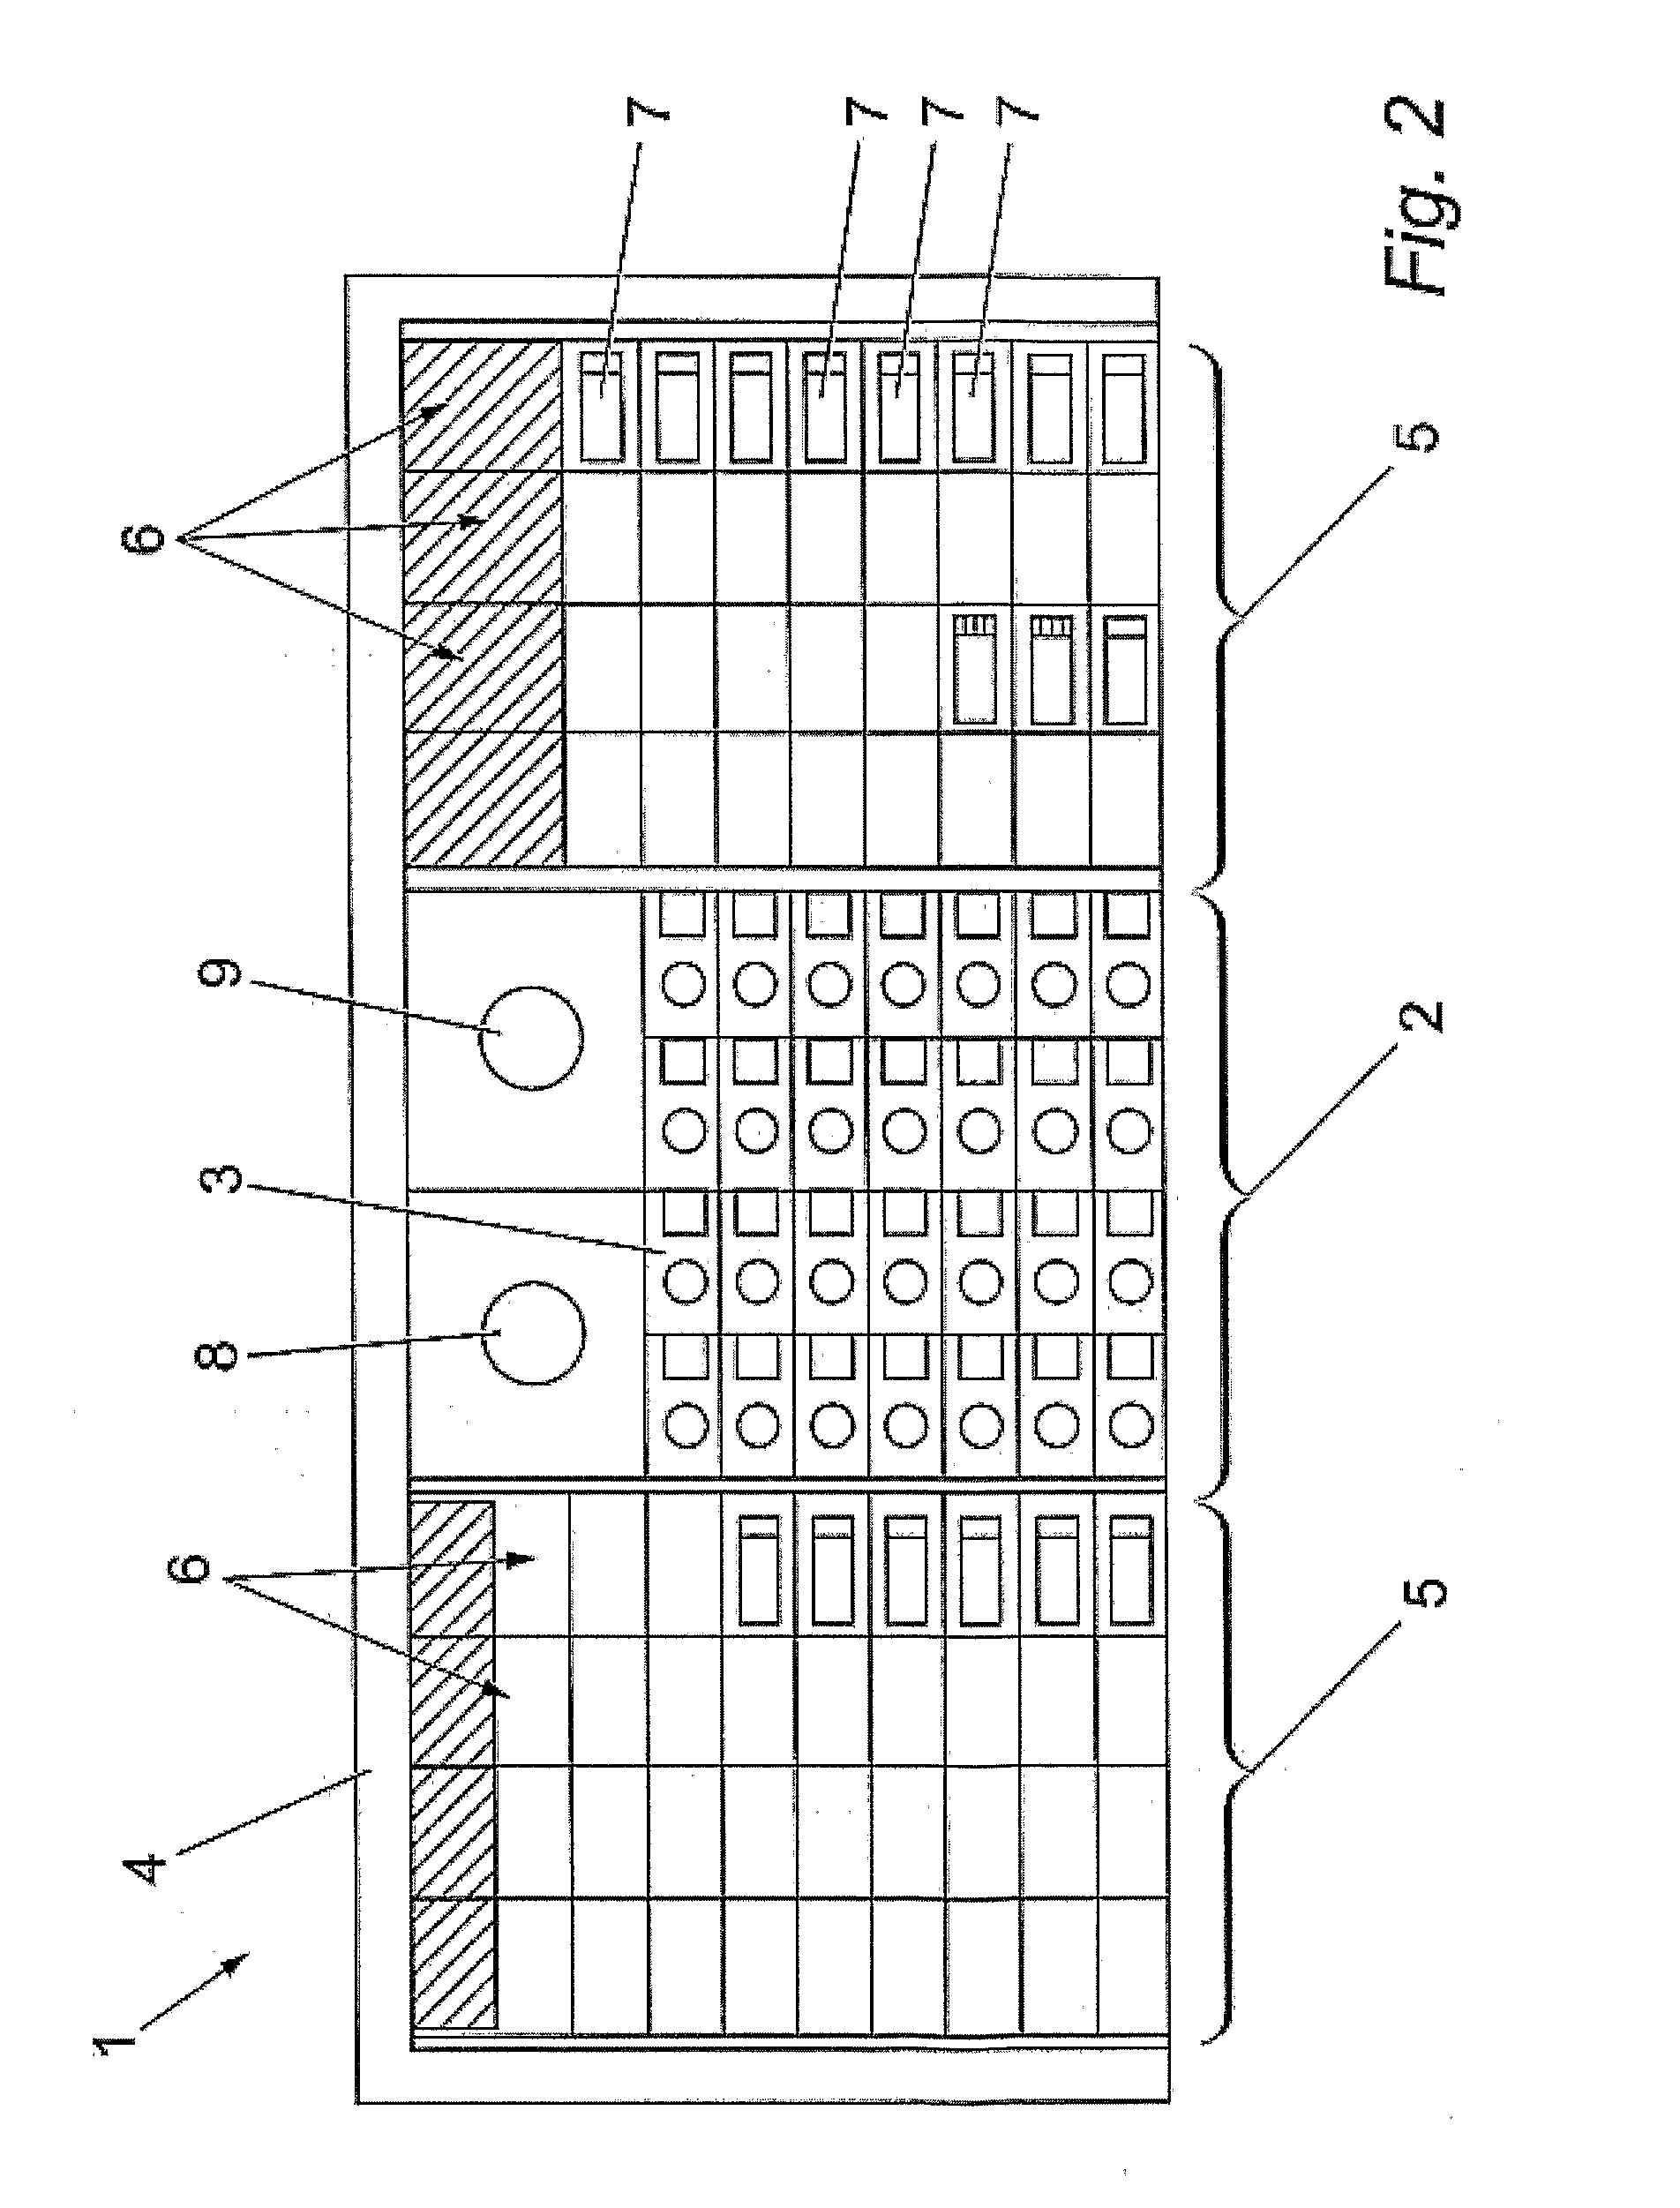 Reagent Delivery System, Dispensing Device and Container for a Biological Staining Apparatus